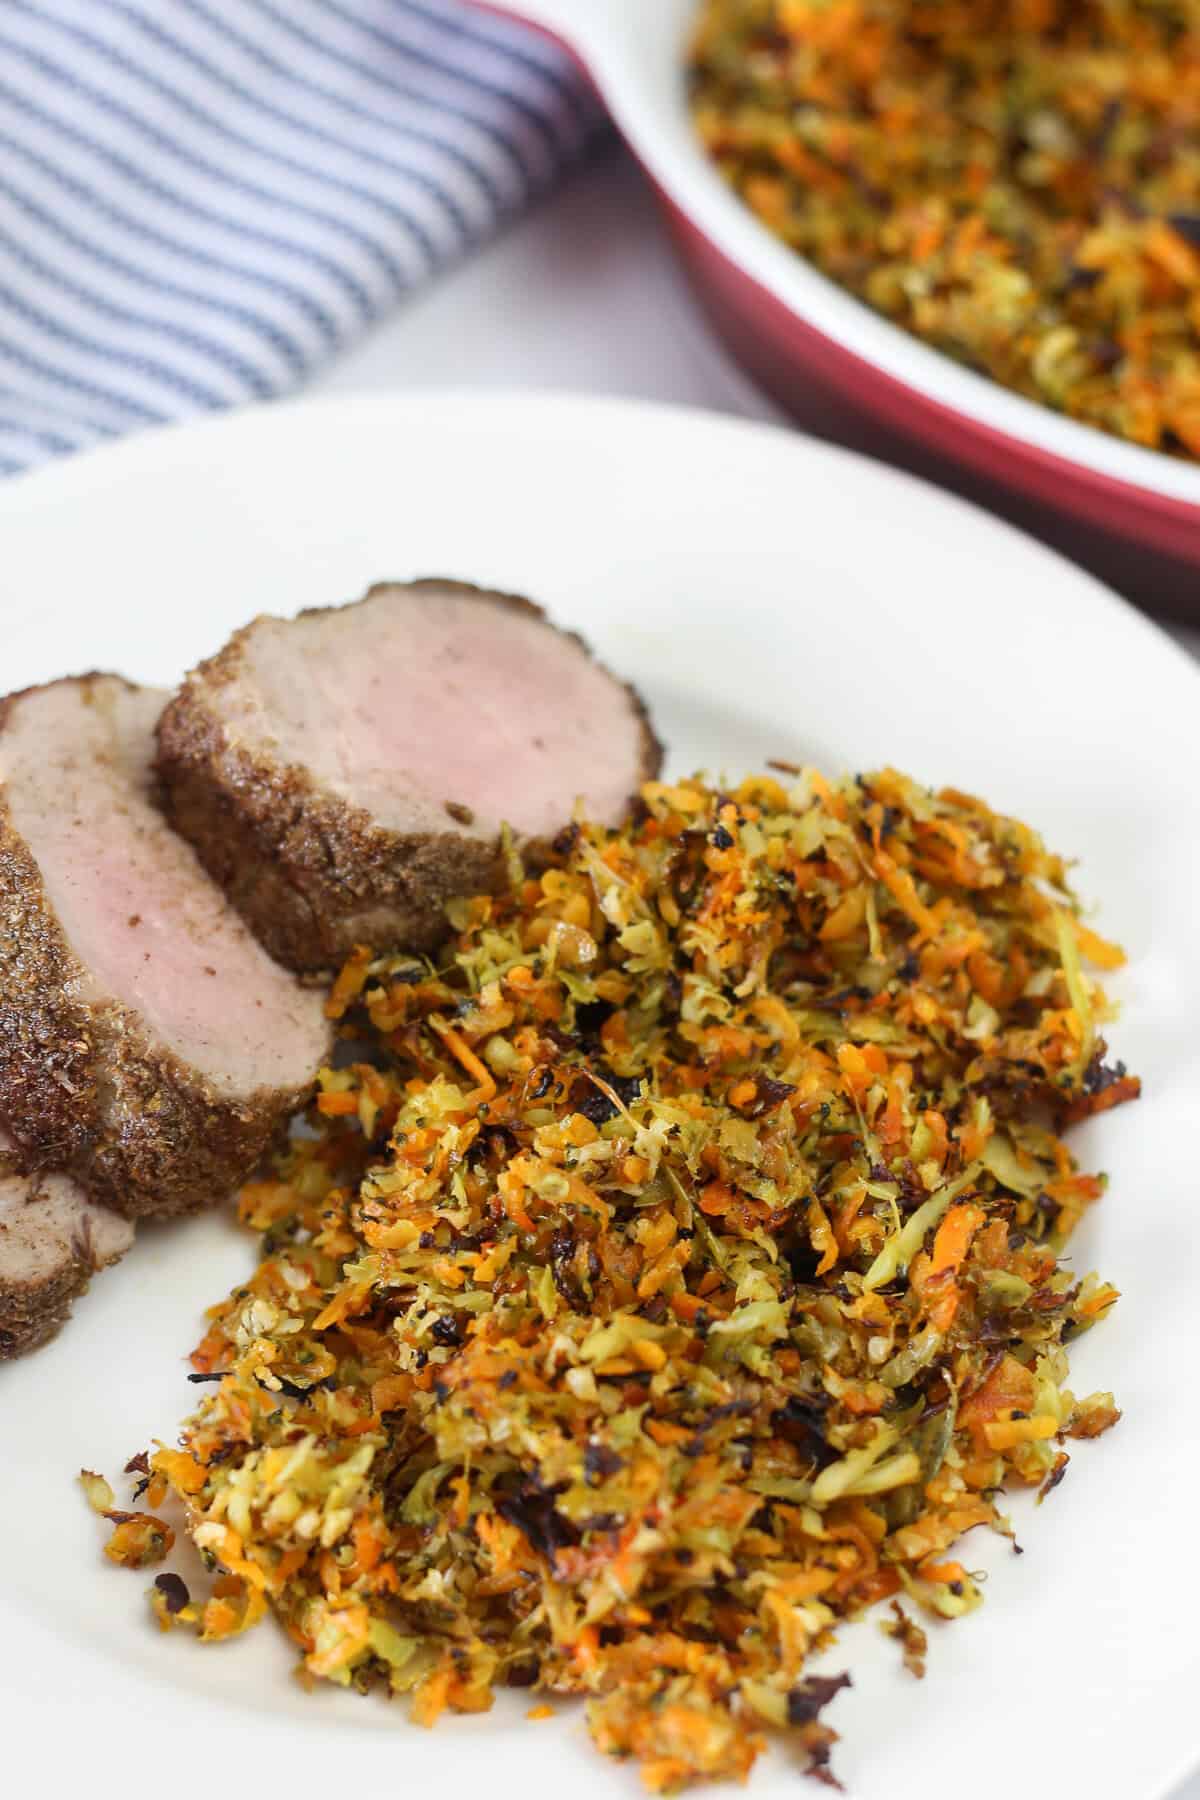 Slices of pork tenderloin with a serving of roasted vegetable hash on a plate.